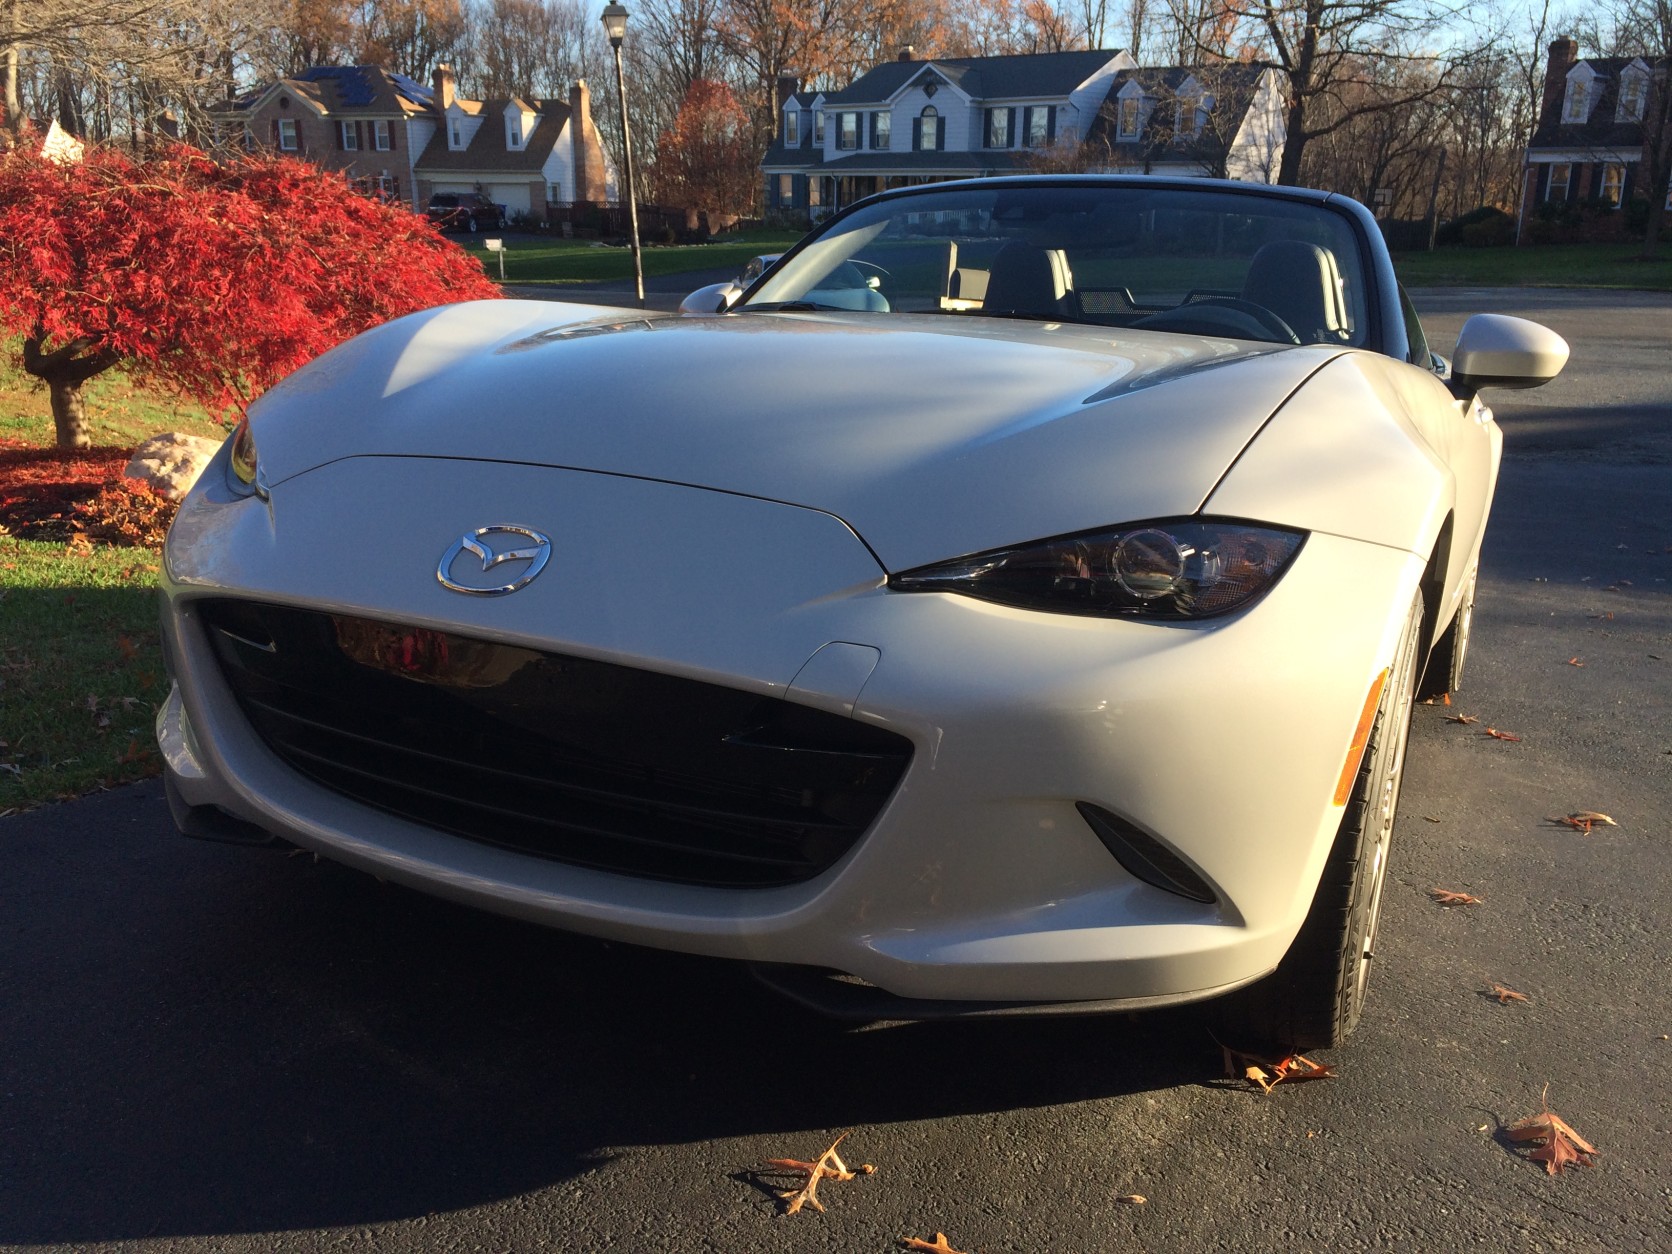 The new car looks a bit angry in the front end, where in the past Miatas looked like a happy, smiling car. (WTOP/Mike Parris)